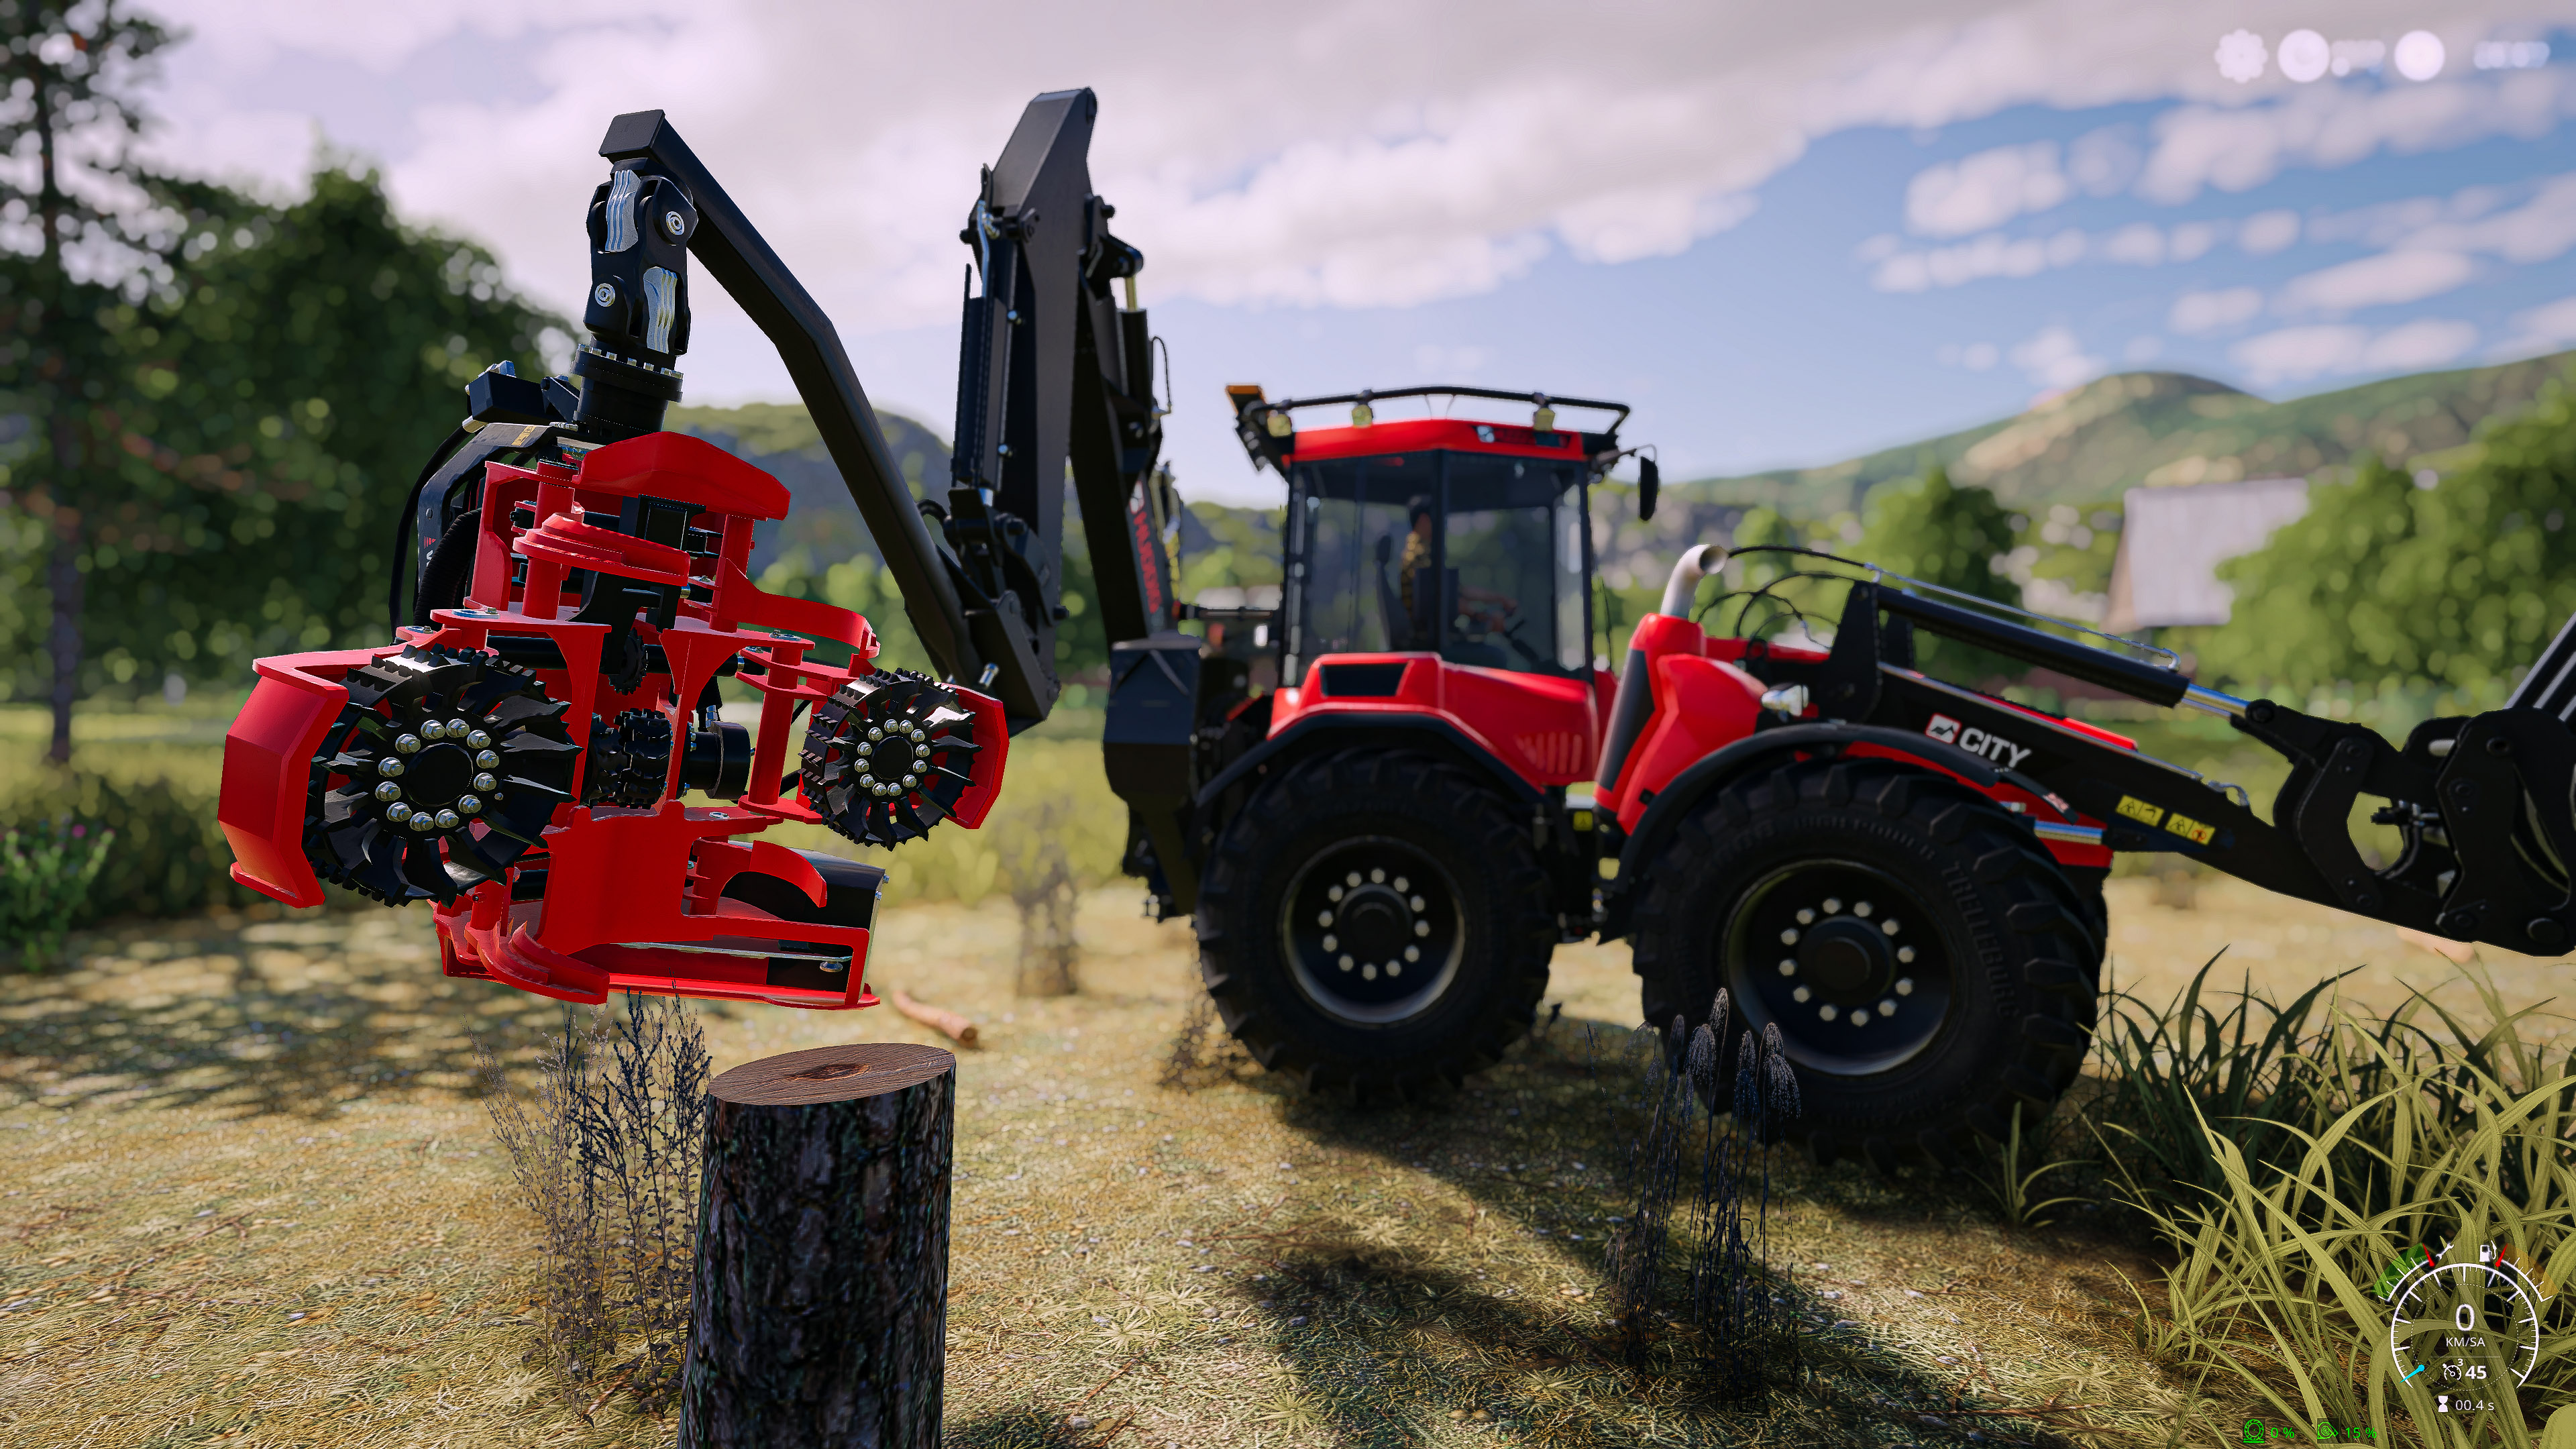 Farming Farming Simulator Farming Simulator 2019 Farm Flowers Trees Water Sky Blue Green Grass Fores 3840x2160